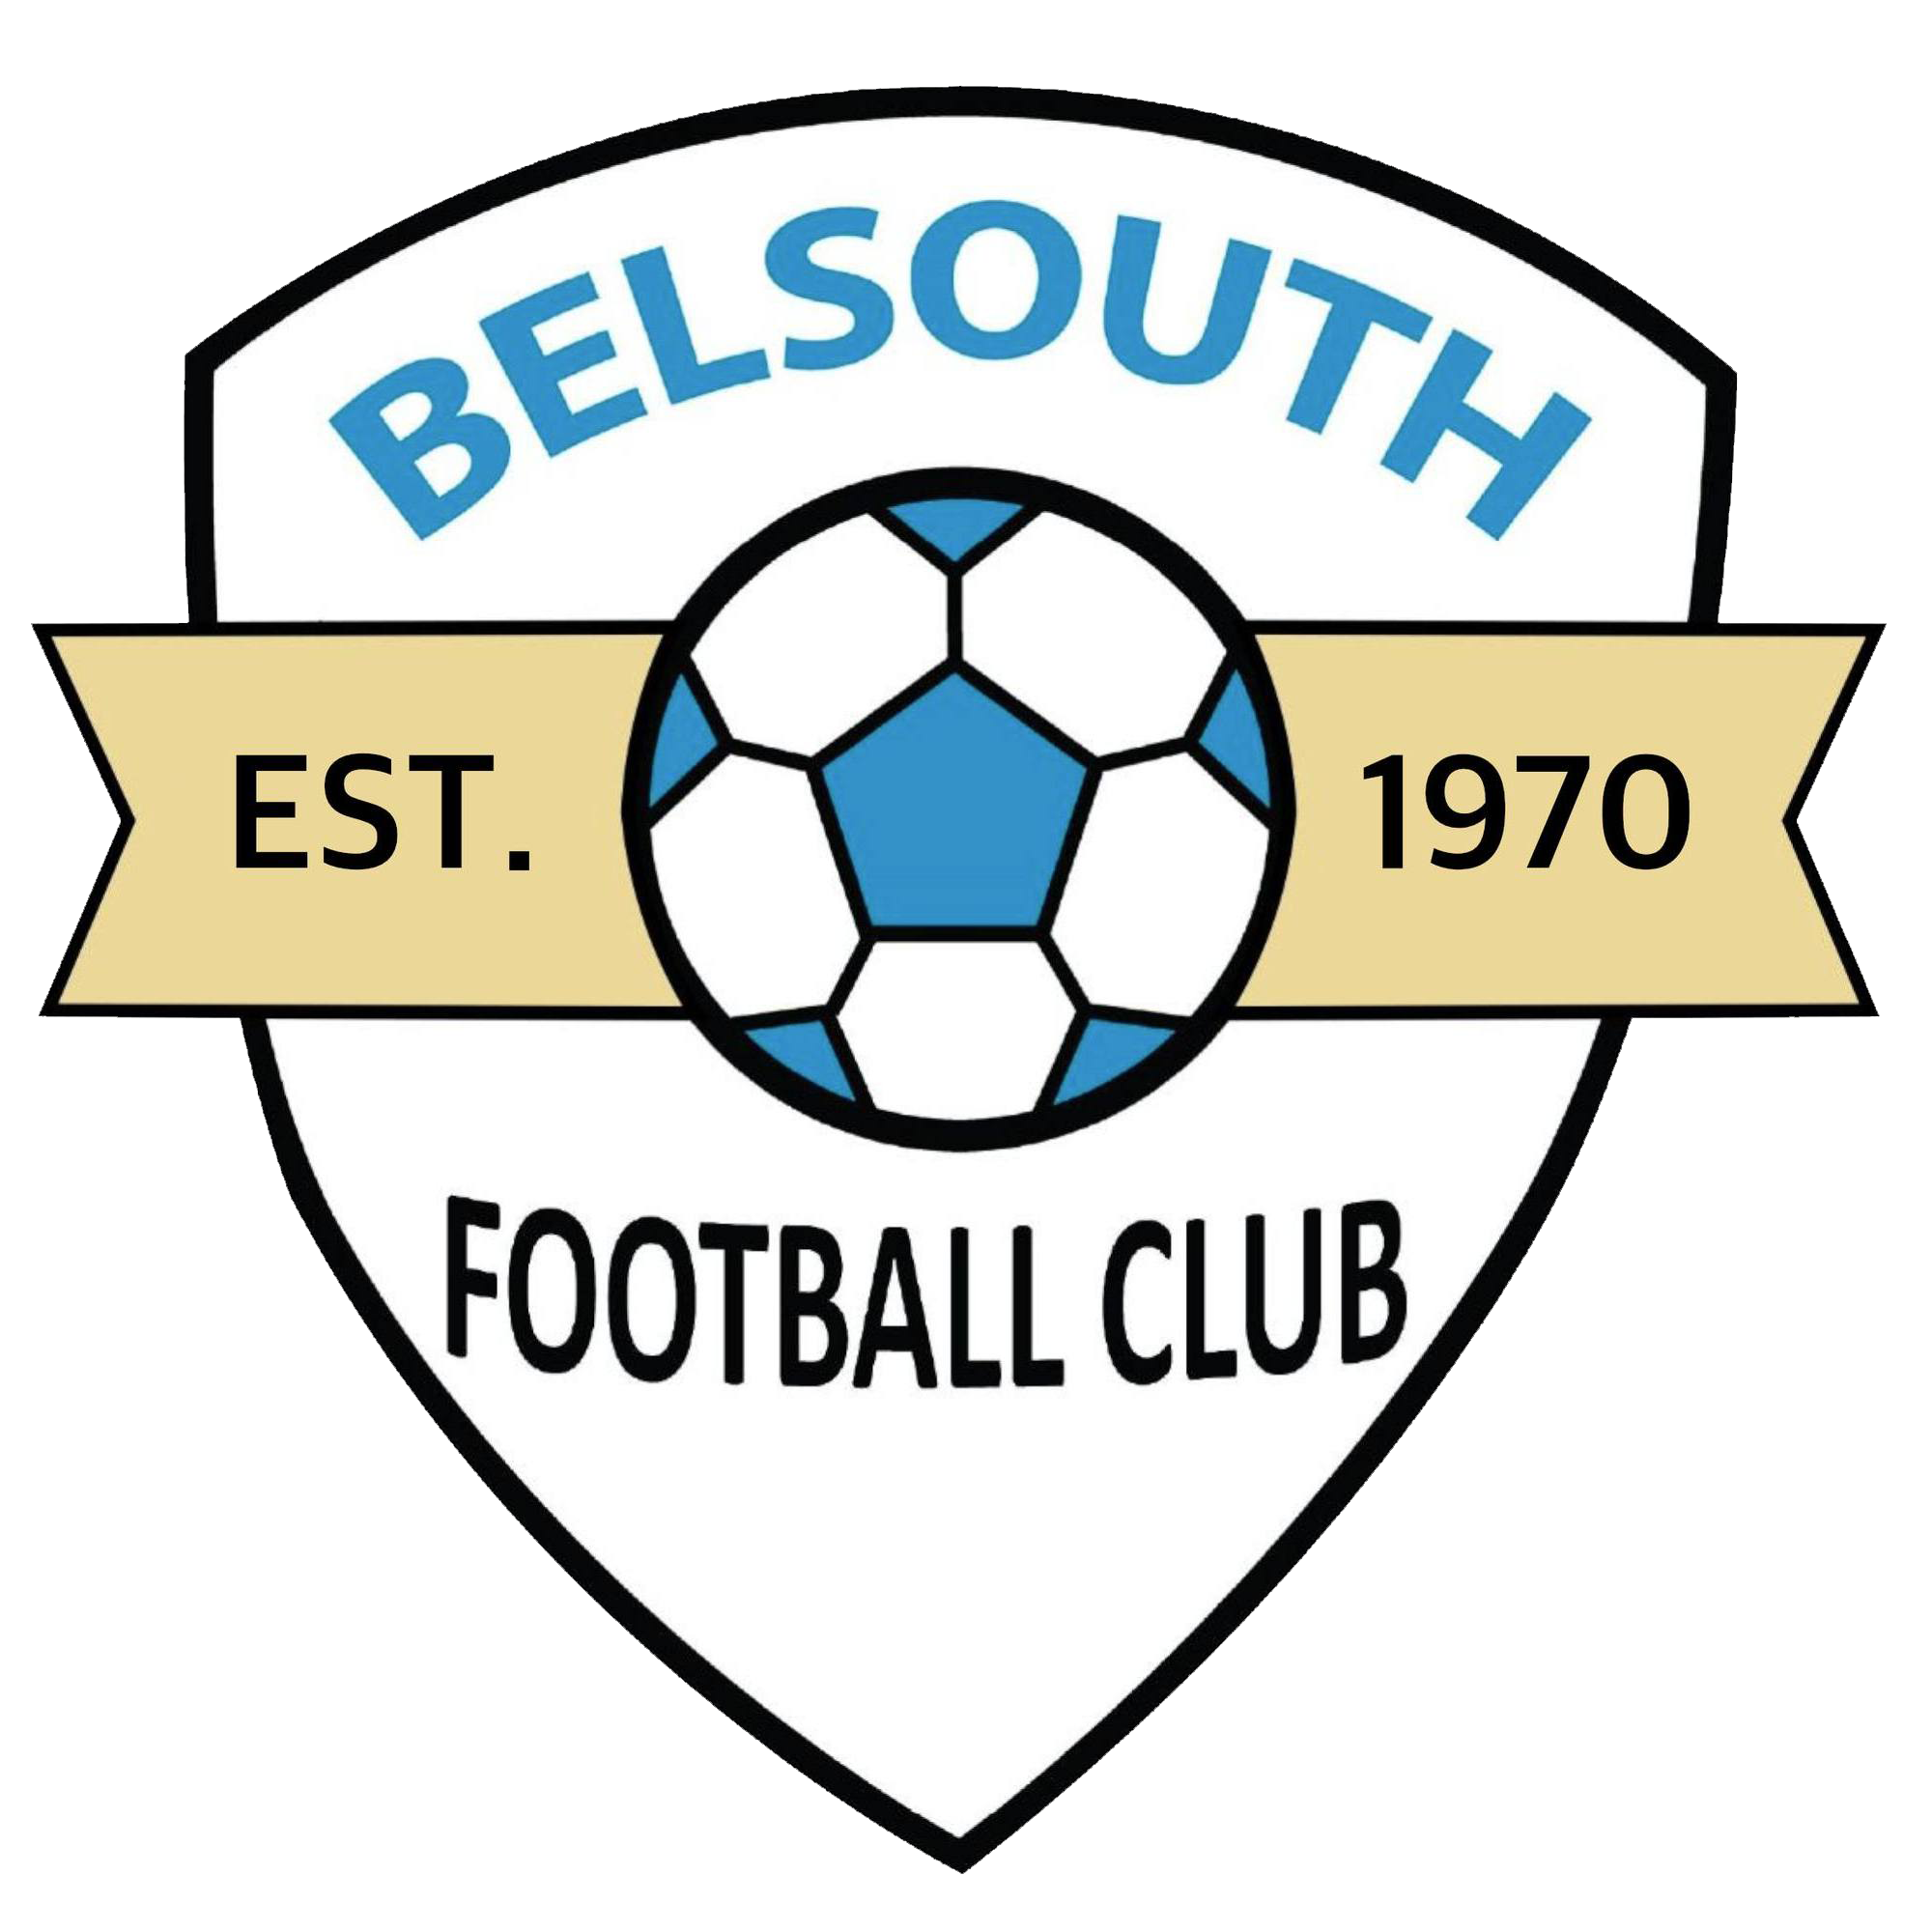 BELSOUTH FOOTBALL CLUB